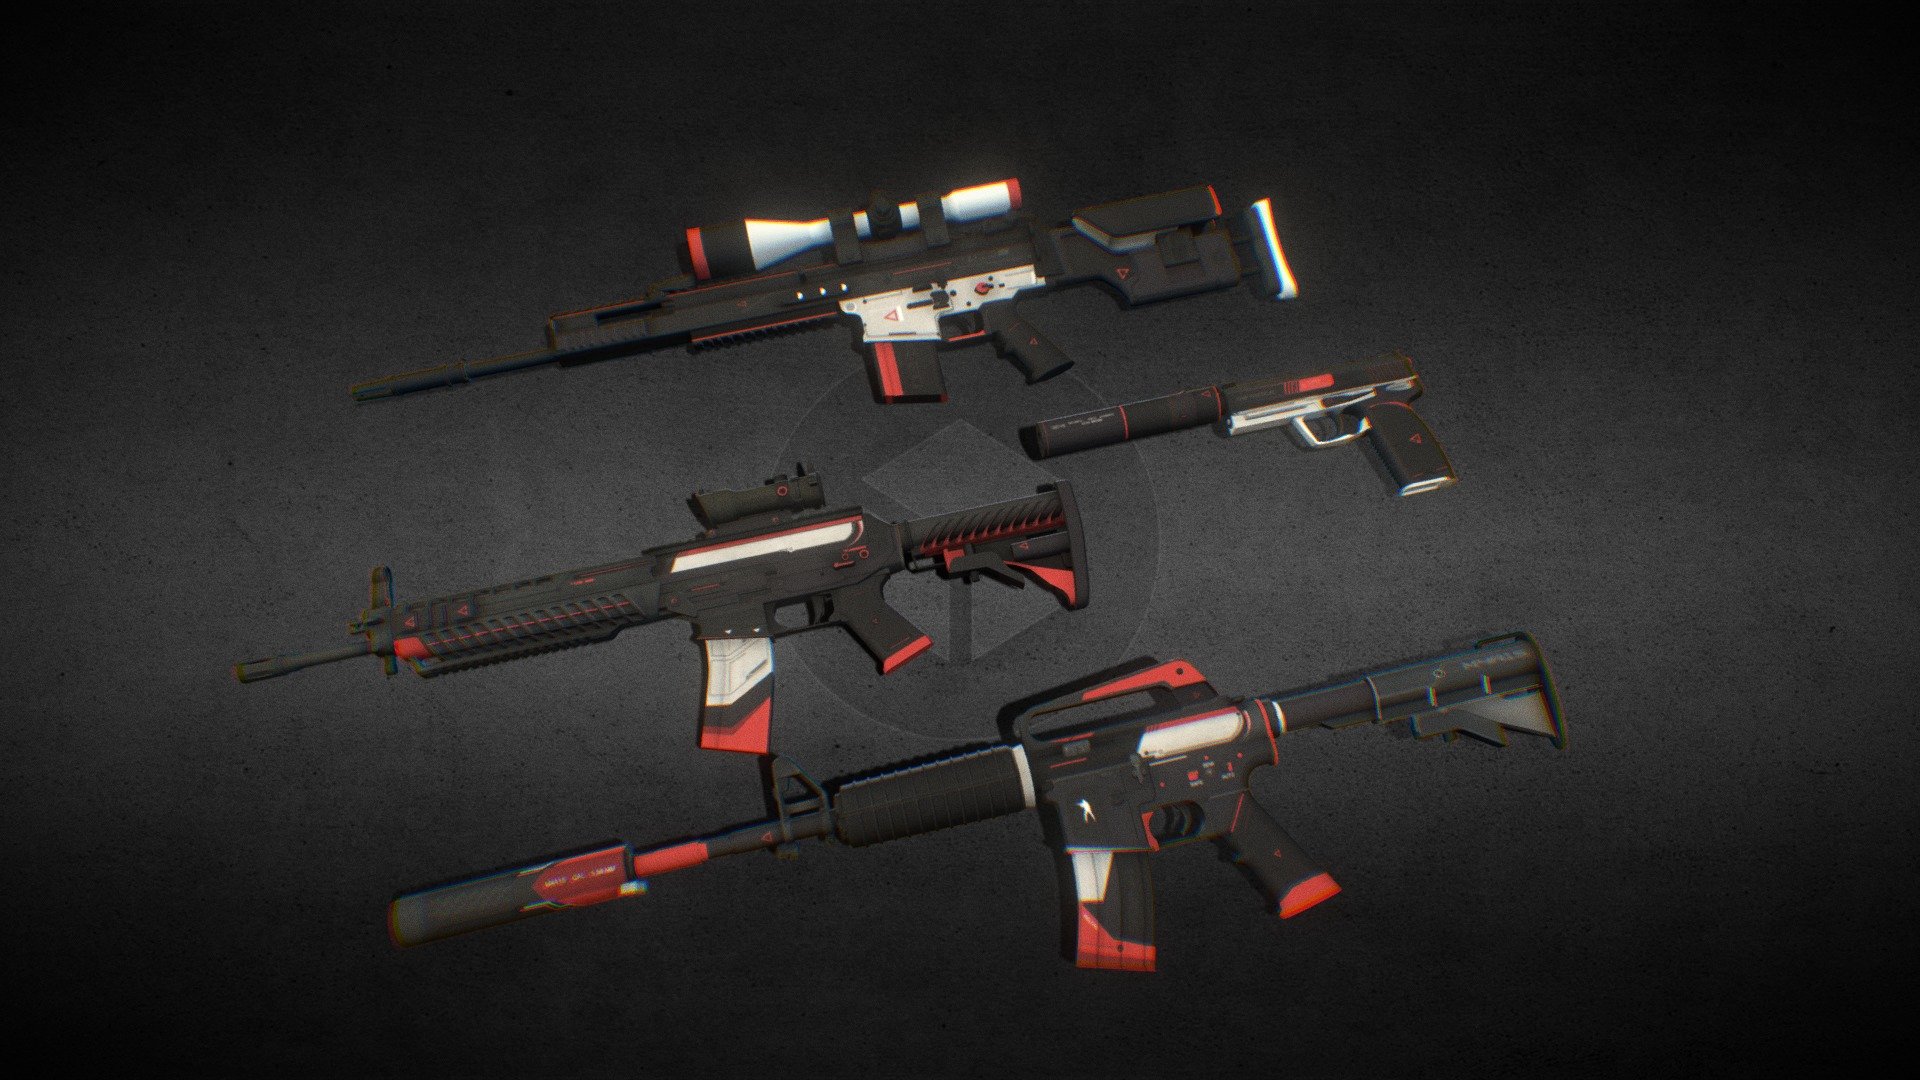 Another Different Artwork from my usual Mechanical Keyboards.


A Collection of Cyrex CS:GO/CS2 Weapon Models (All 4 Weapons that have Cyrex).
Stats:

Objects Count: 4

Poly Count: 60,518

Vertex Count: 33,712 



File Formats:

.blend 17 MB

.obj 5 MB

.zip 1 MB (4 obj files one for each weapon)



Textures:

All Textures are 2048x2048 pixels and contains:

Cyrex_M4A4-S.png

Cyrex_SCAR-20.png

Cyrex_SG 553.png

Cyrex_USP-S.png

(Each weapon has it's own texture)

IMPORTANT: For Cycles, Plug Alpha output of the texture to subsurface color (or Alpha) input of the Principled BSDF for the png to work correctly.

I hope you like it, feel free to give me feedback and suggest Artworks and collections for me to do next. 
Also contact me or email me at amjadkalash2000@gmail.com if you want a custom Artwork for your inventory 3d model